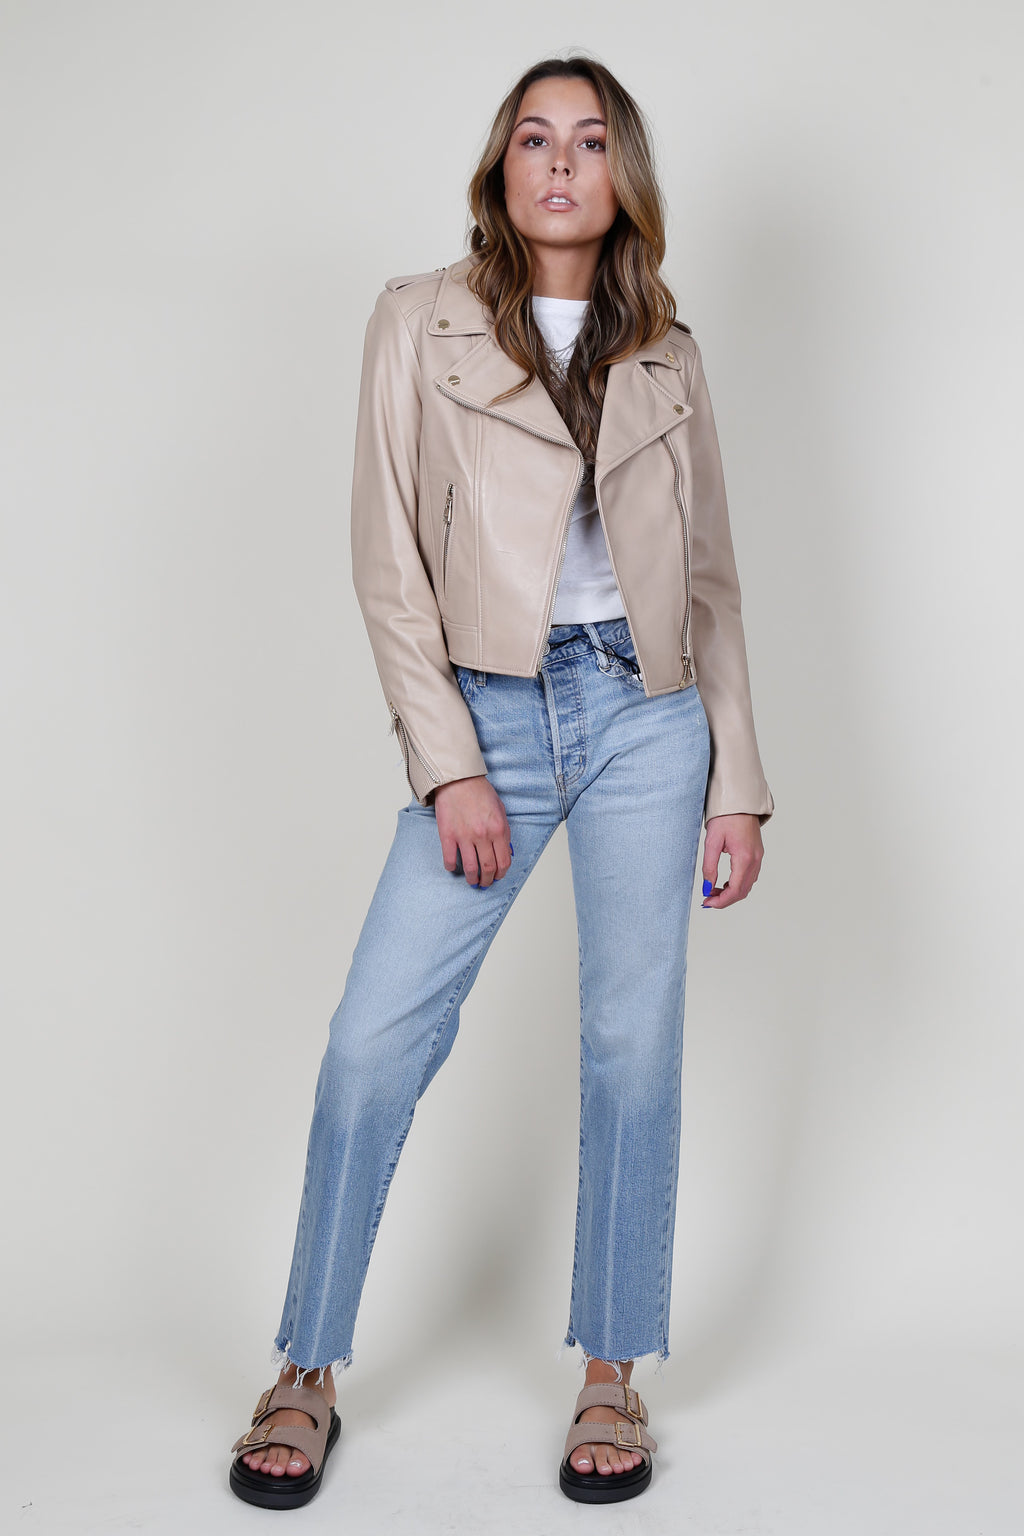 LAMARQUE | The Donna Jacket - Wheat